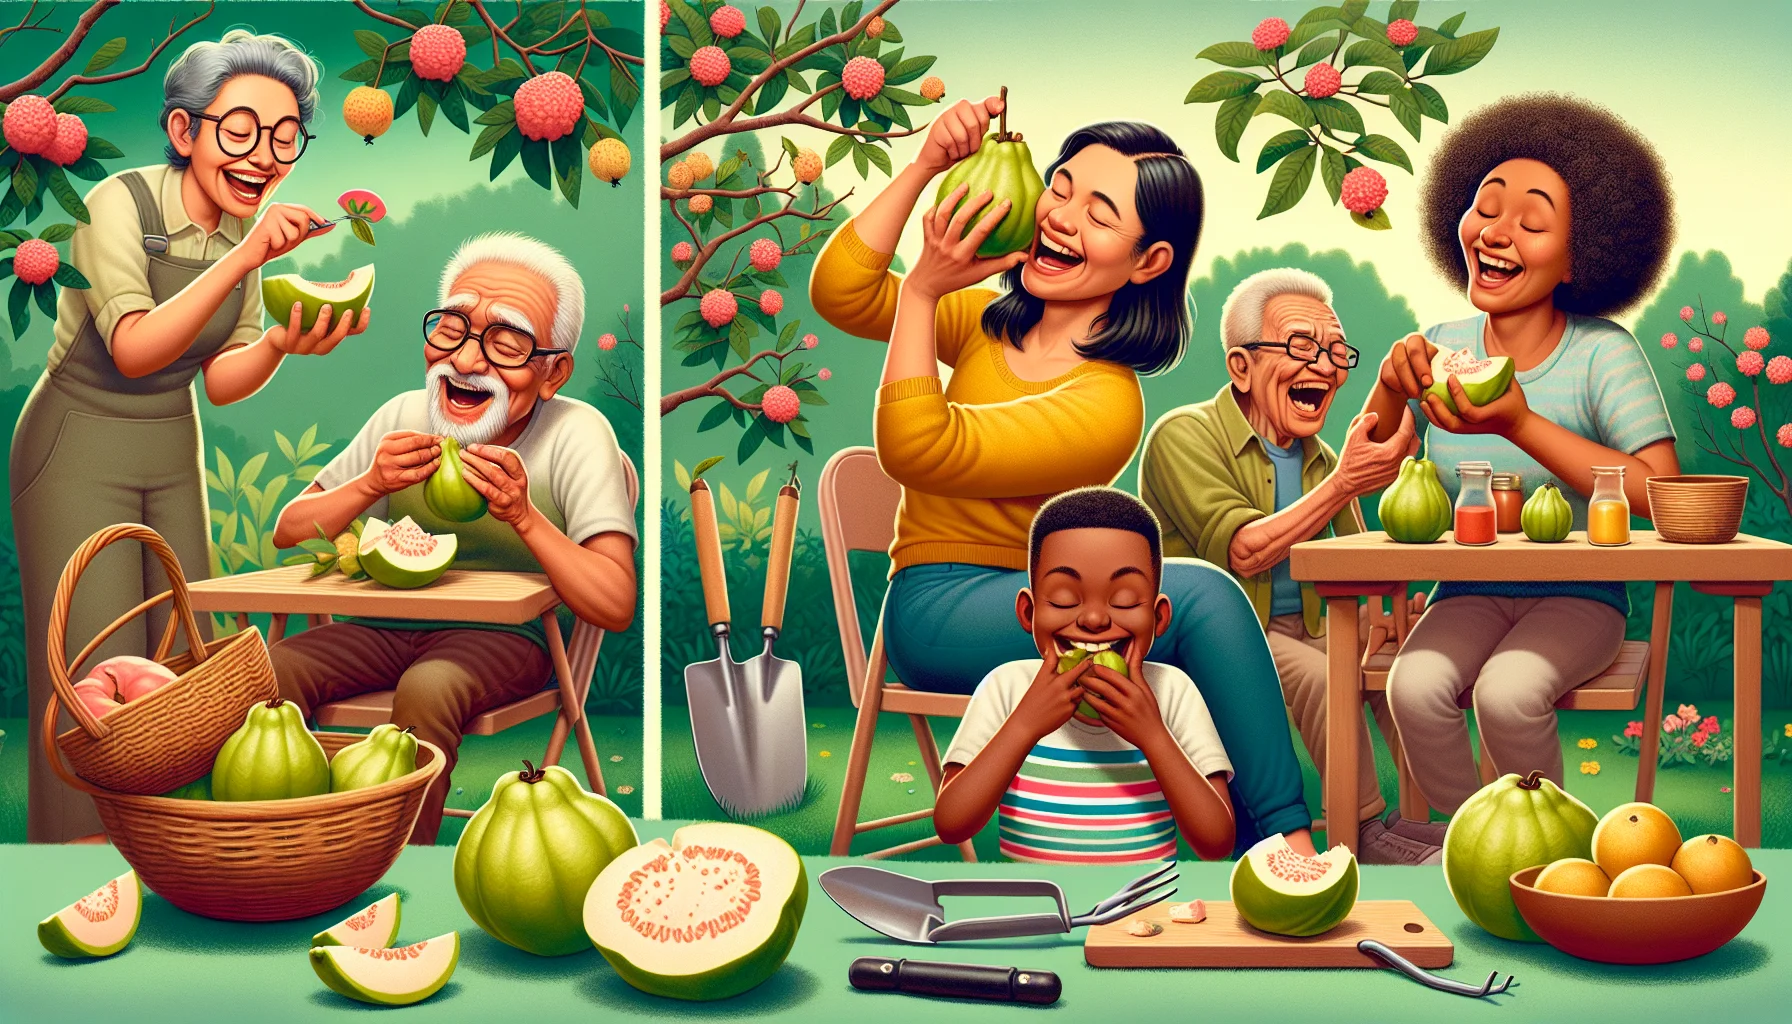 Creatively depict a humorous scenario of how to enjoy eating a lusciously ripe guava in a garden setting. Include a diverse range of individuals participating in the act. Let's see a middle-aged South-Asian woman delicately slicing the vibrant fruit, a young black boy eagerly waiting for his slice, and an elderly Hispanic man laughing heartily while munching on his piece. Also, illustrate blooming guava trees with fruit hanging from the branches and various garden tools creatively used as dining implements. Make sure the image stimulates the love for gardening and finds humor in the natural joy of enjoying fresh produce.